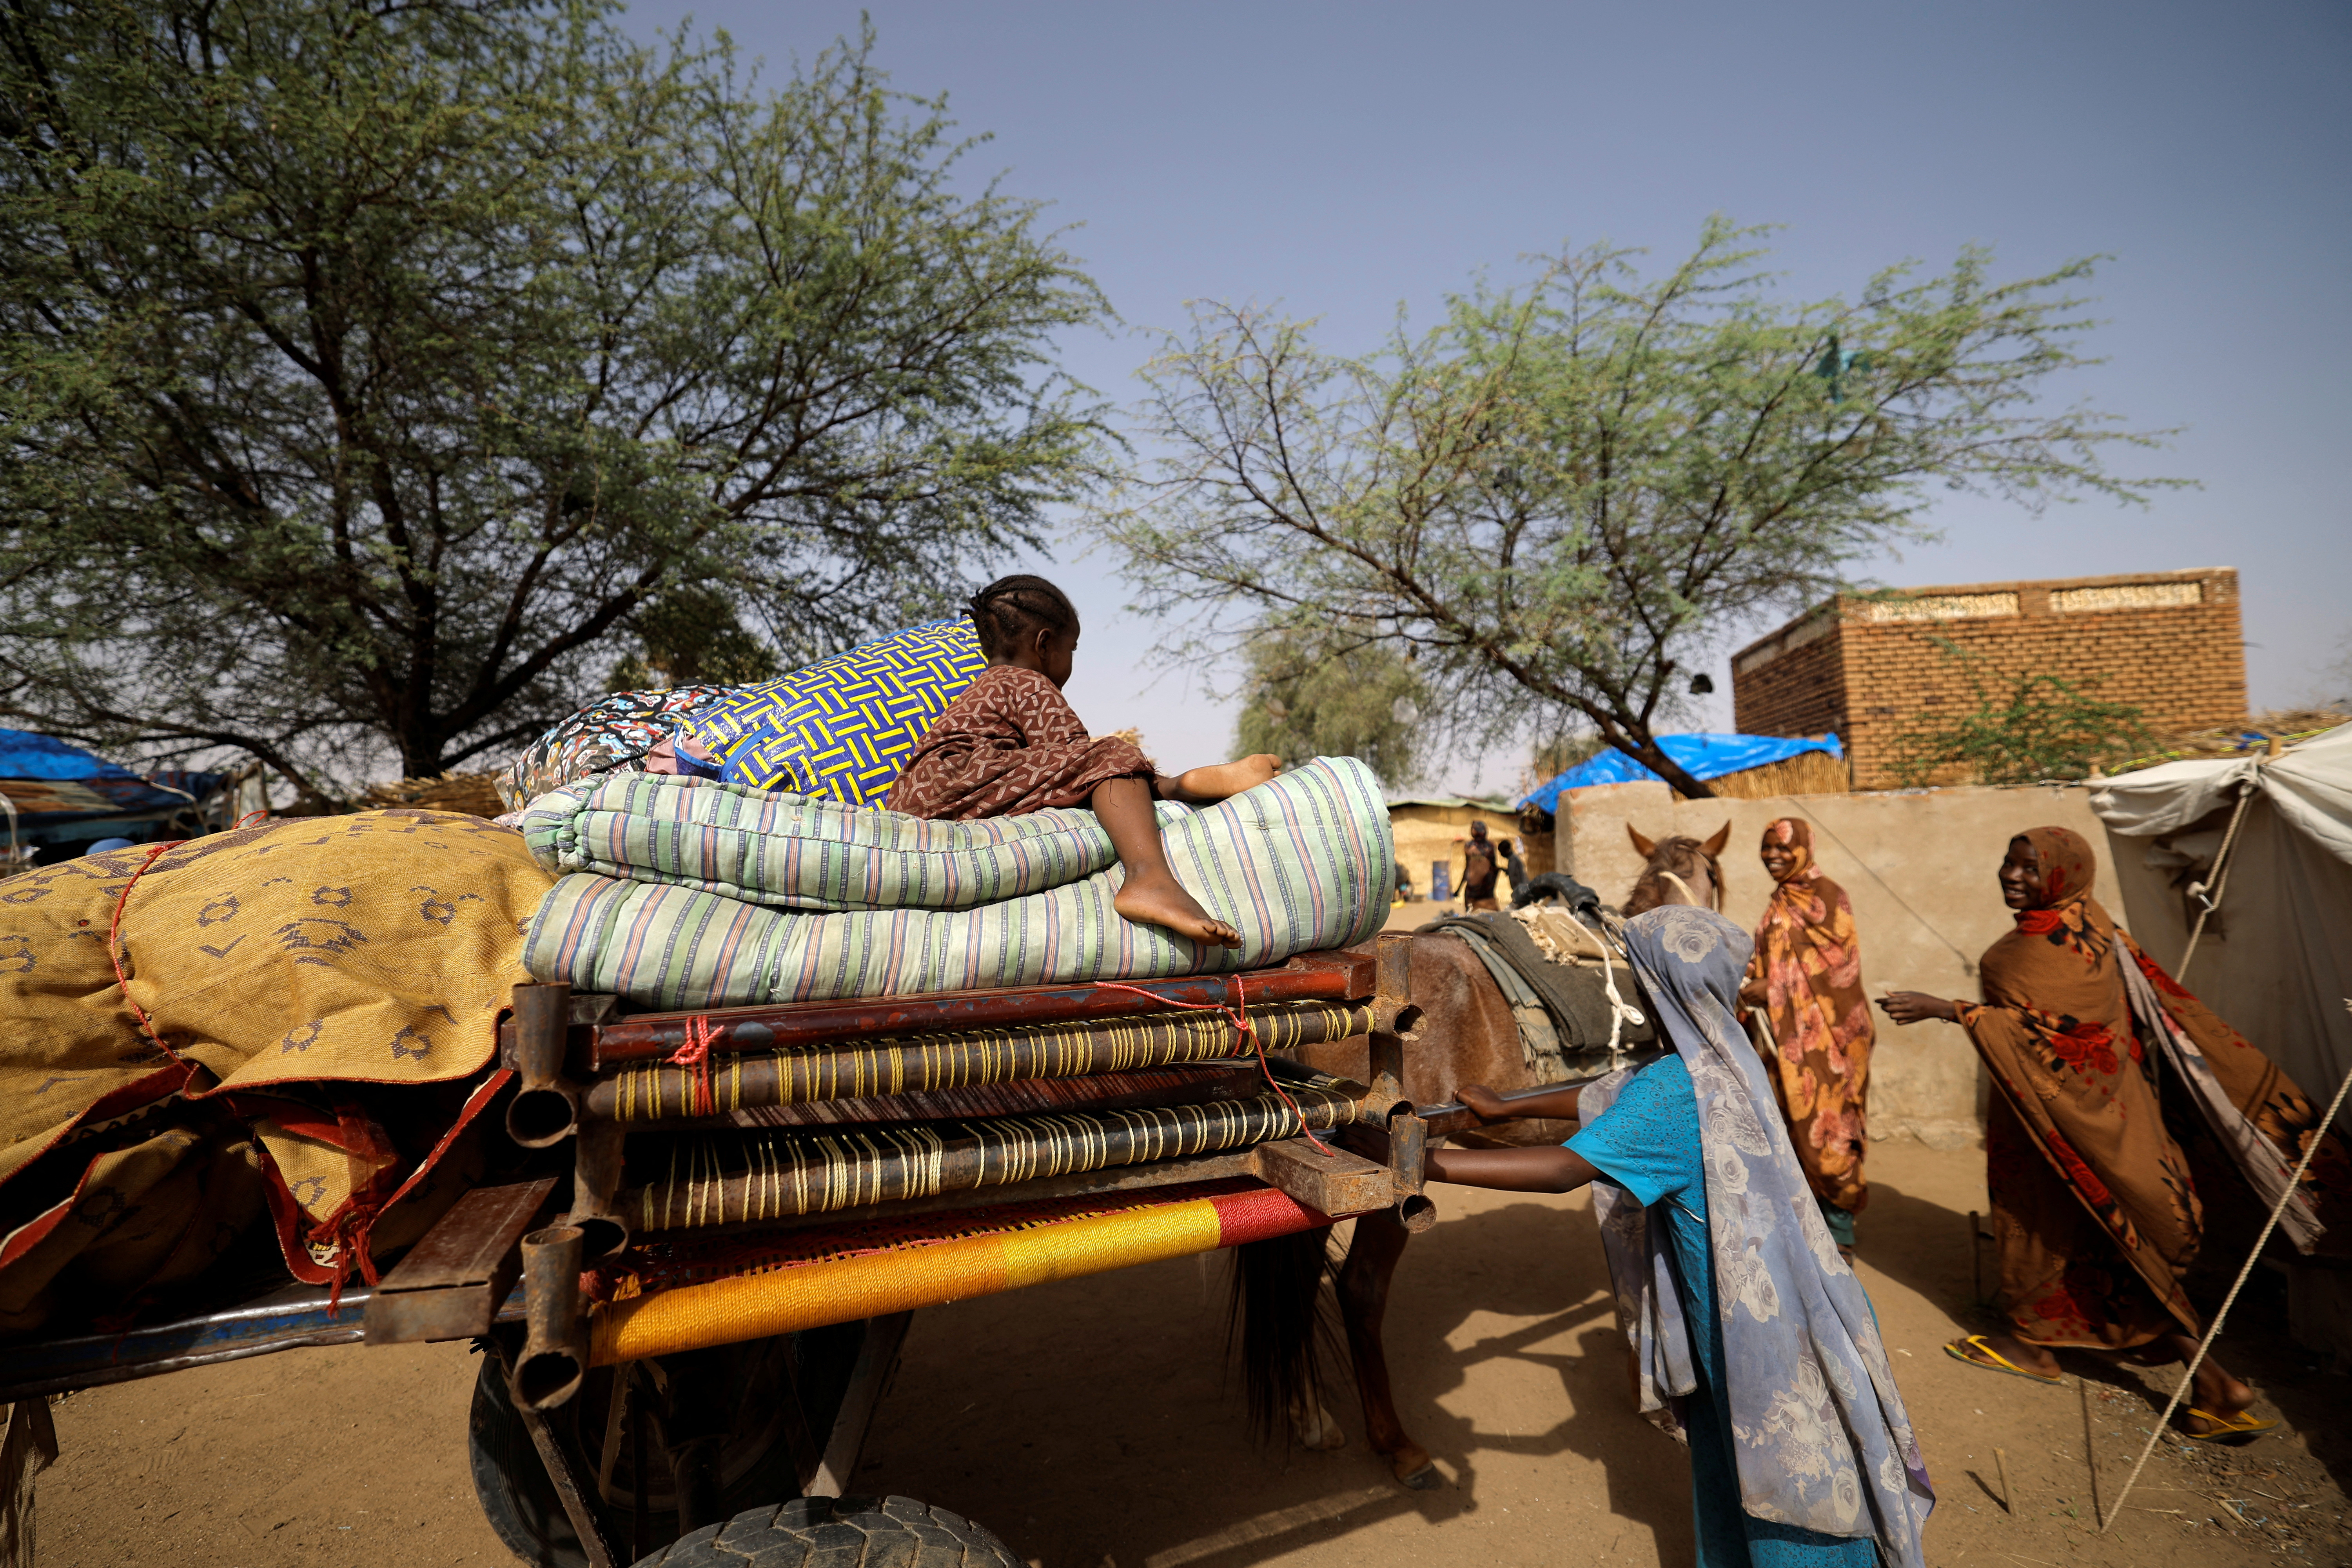 Sudan refugees strain cash-strapped Chad's hospitality